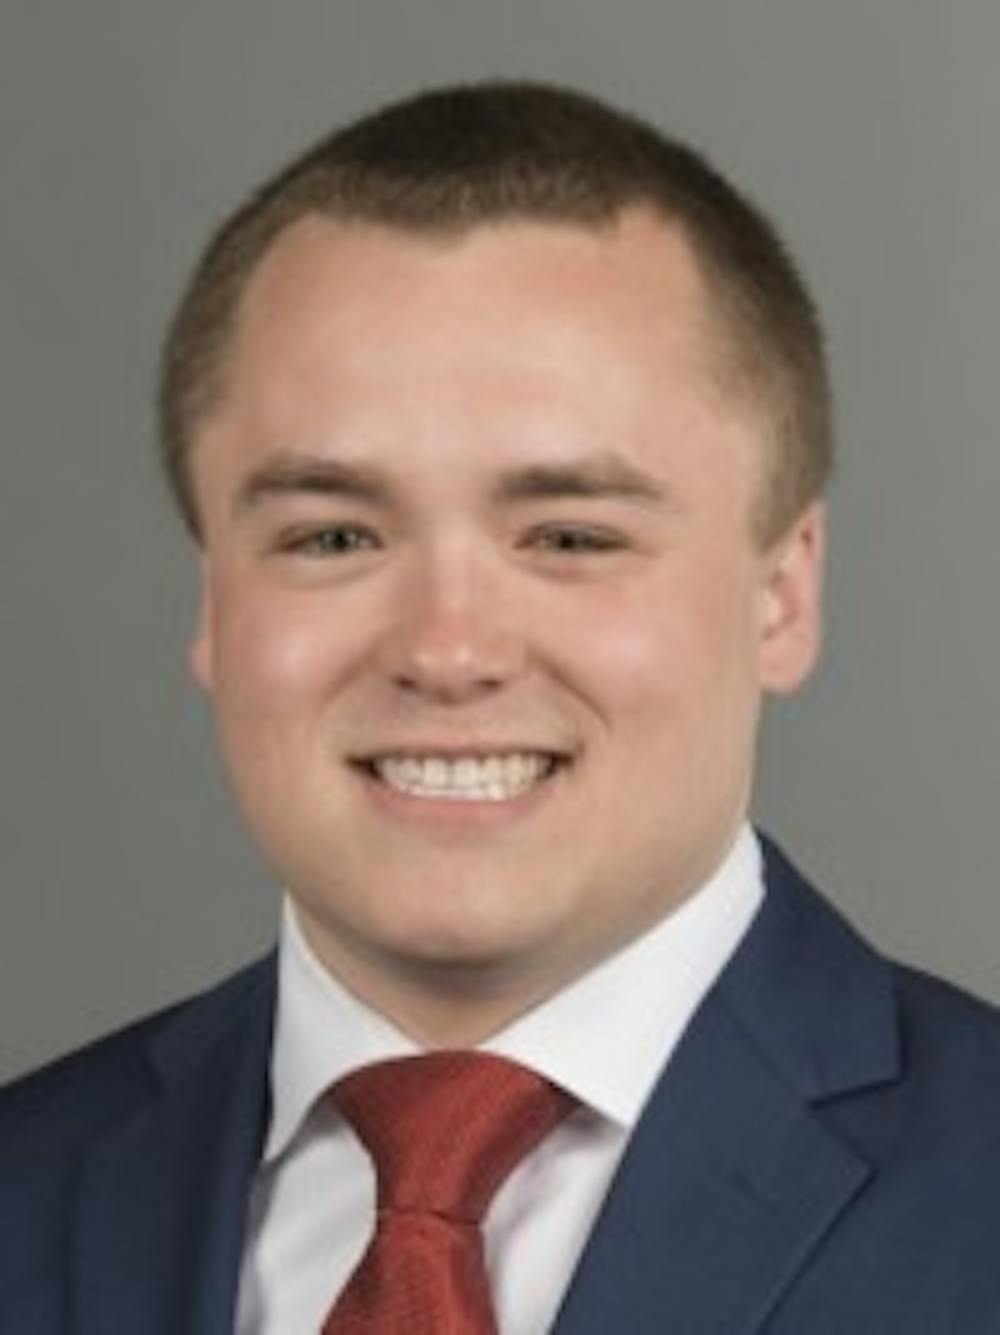 Ryan Ring is a junior at UW-Eau Claire studying finance and political science.&nbsp;